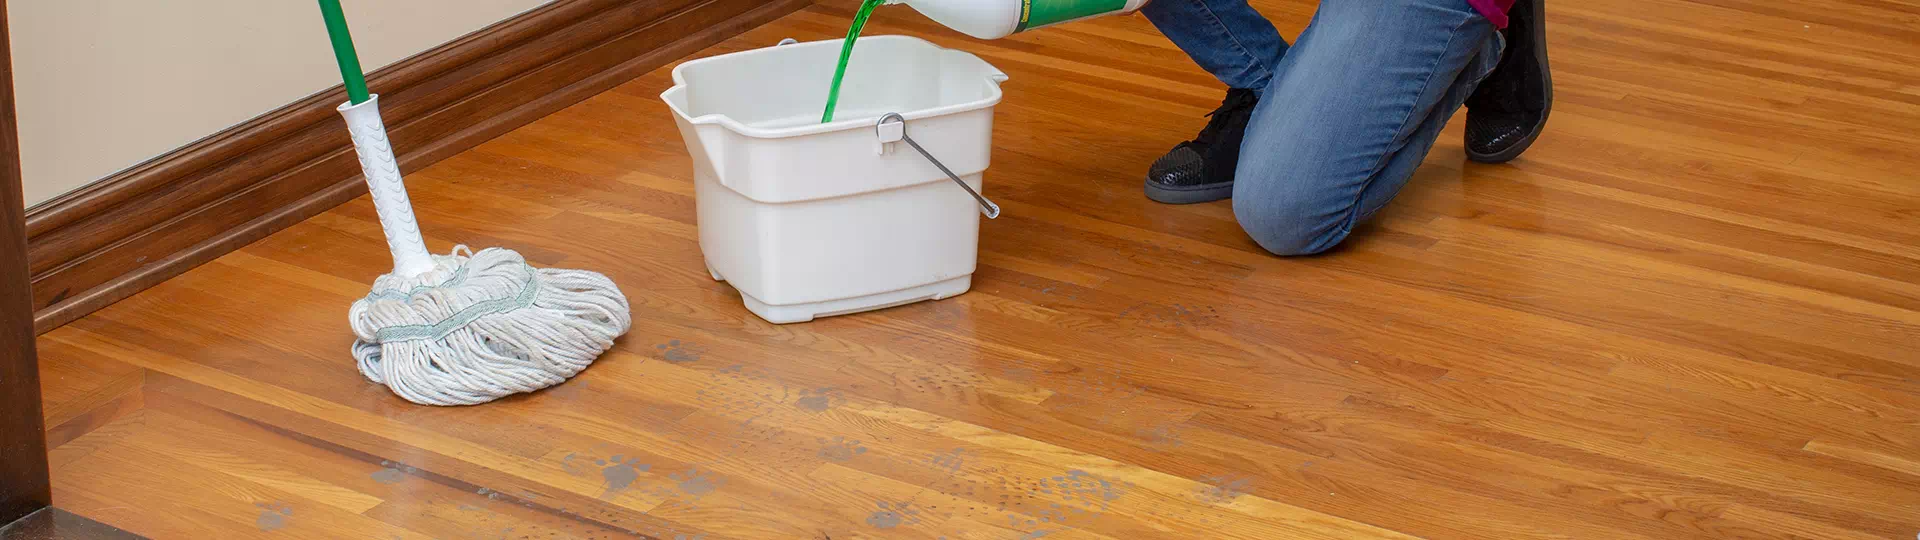 How To Clean Hardwood Floors Simple Green, What Is The Best Way To Clean Hardwood Floors With Polyurethane